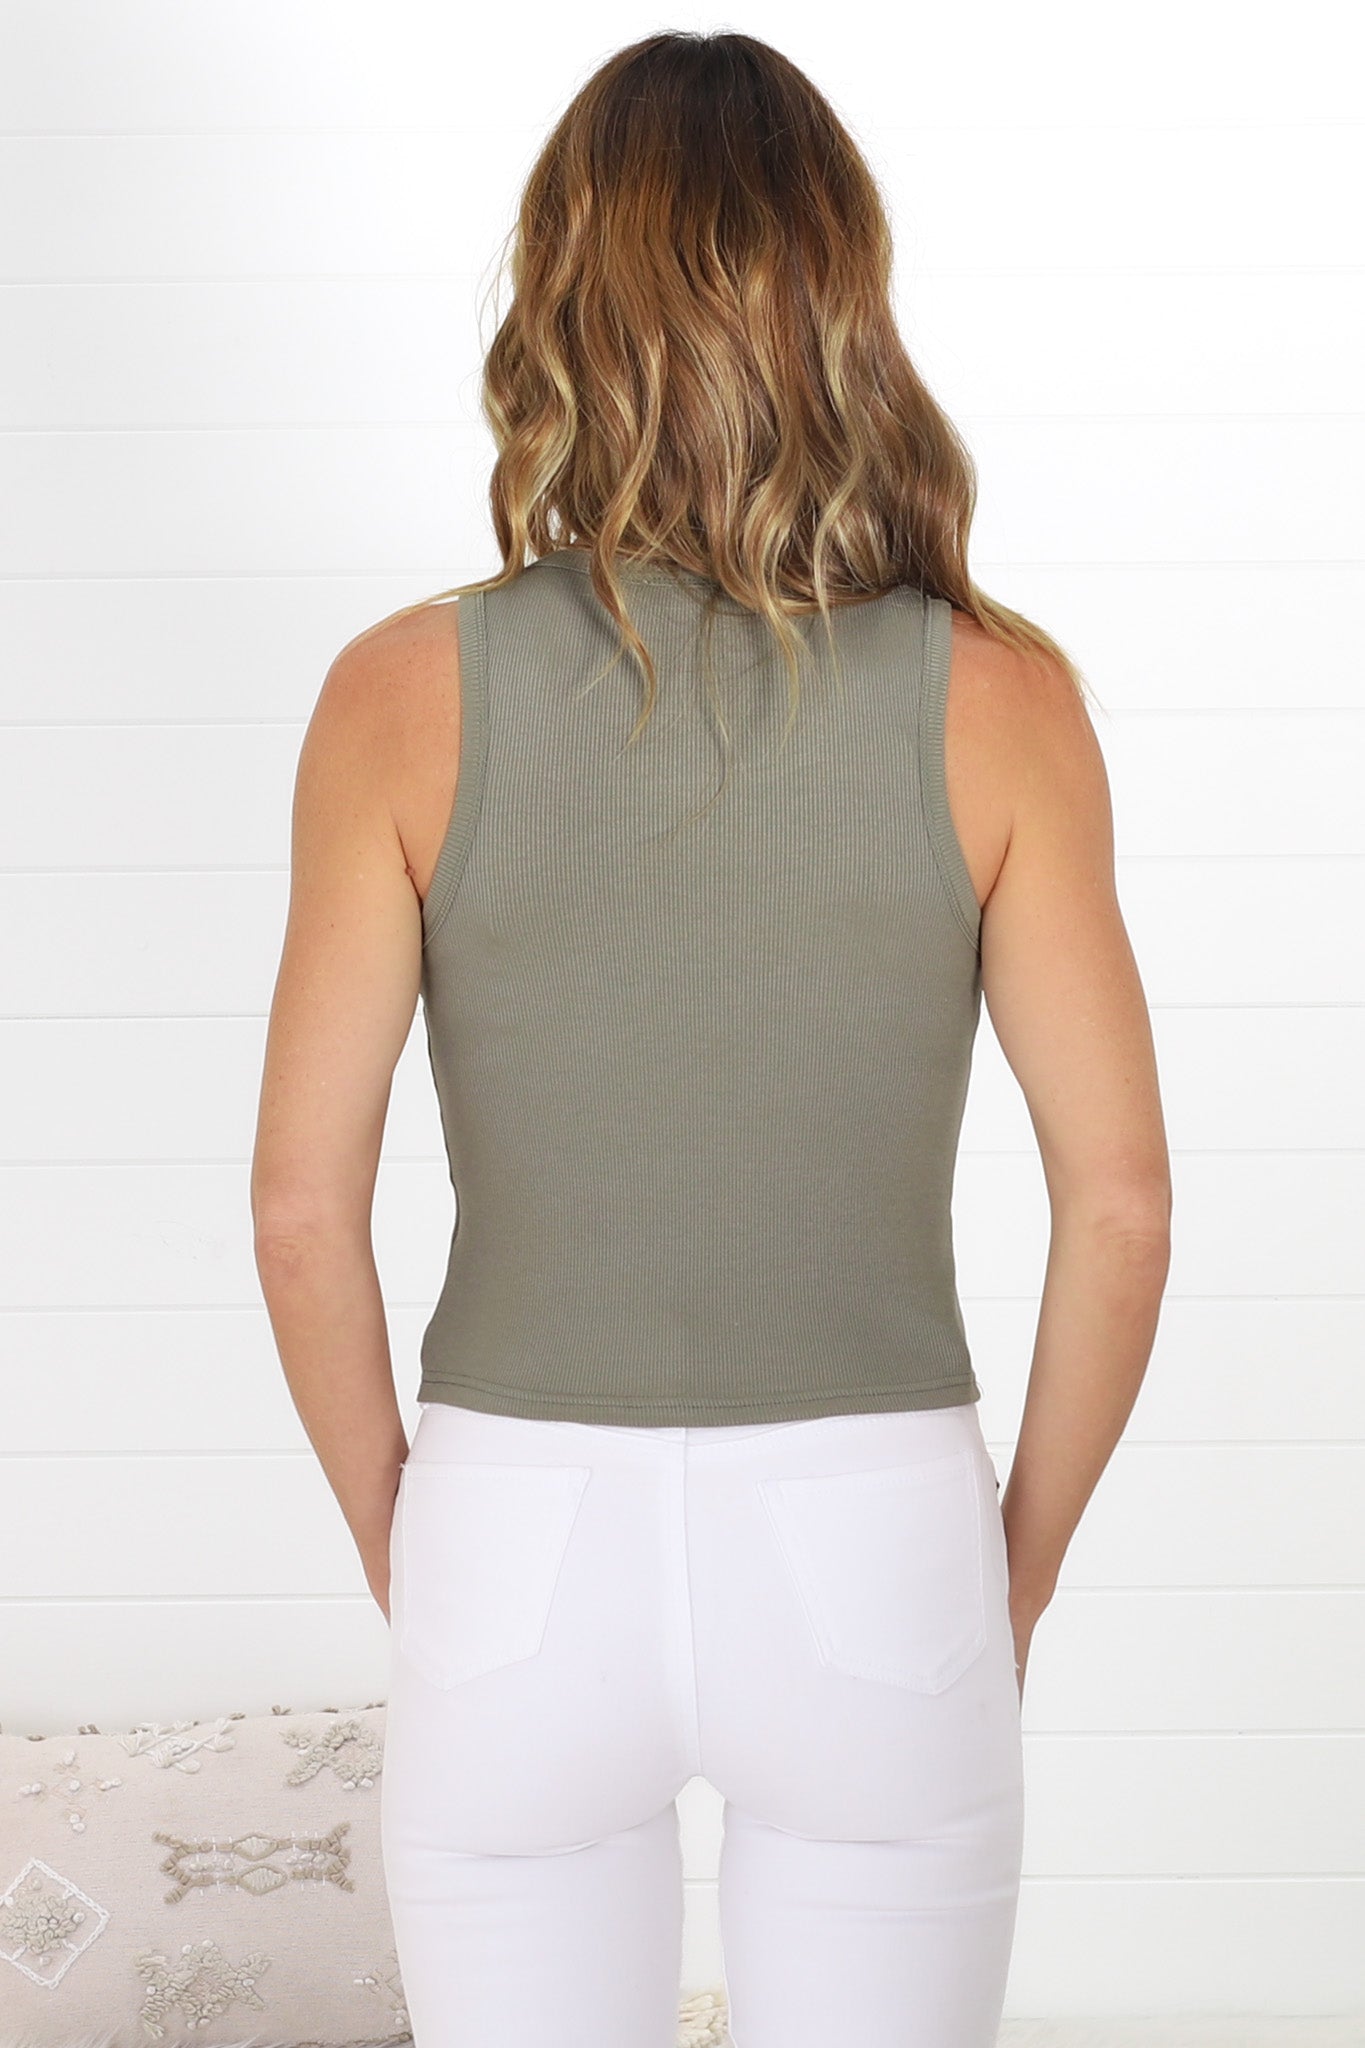 Saint Clair Ribbed Top - High Neckline Racer Back RIbbed Top in Khaki